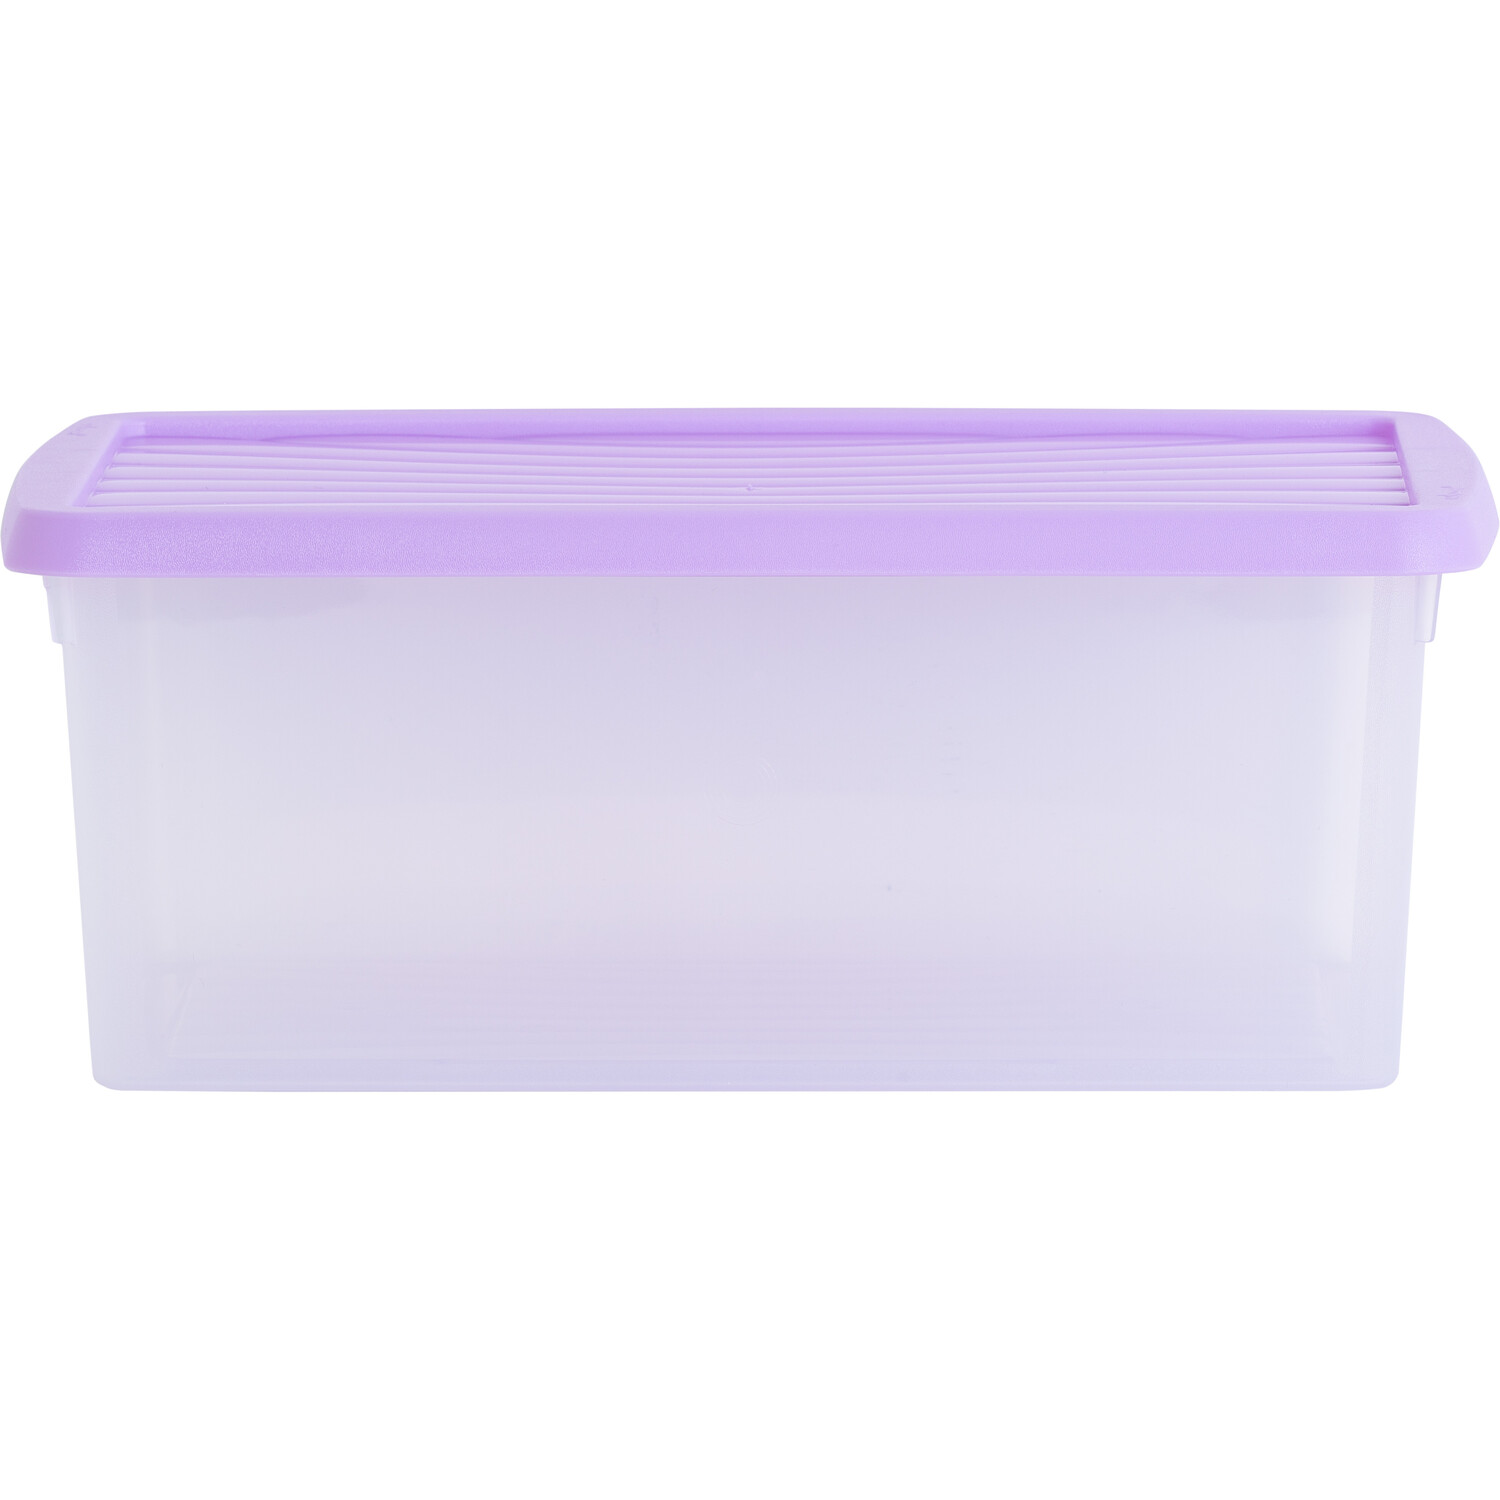 Single 9L Storage Box with Clip On Lid in Assorted styles Image 3